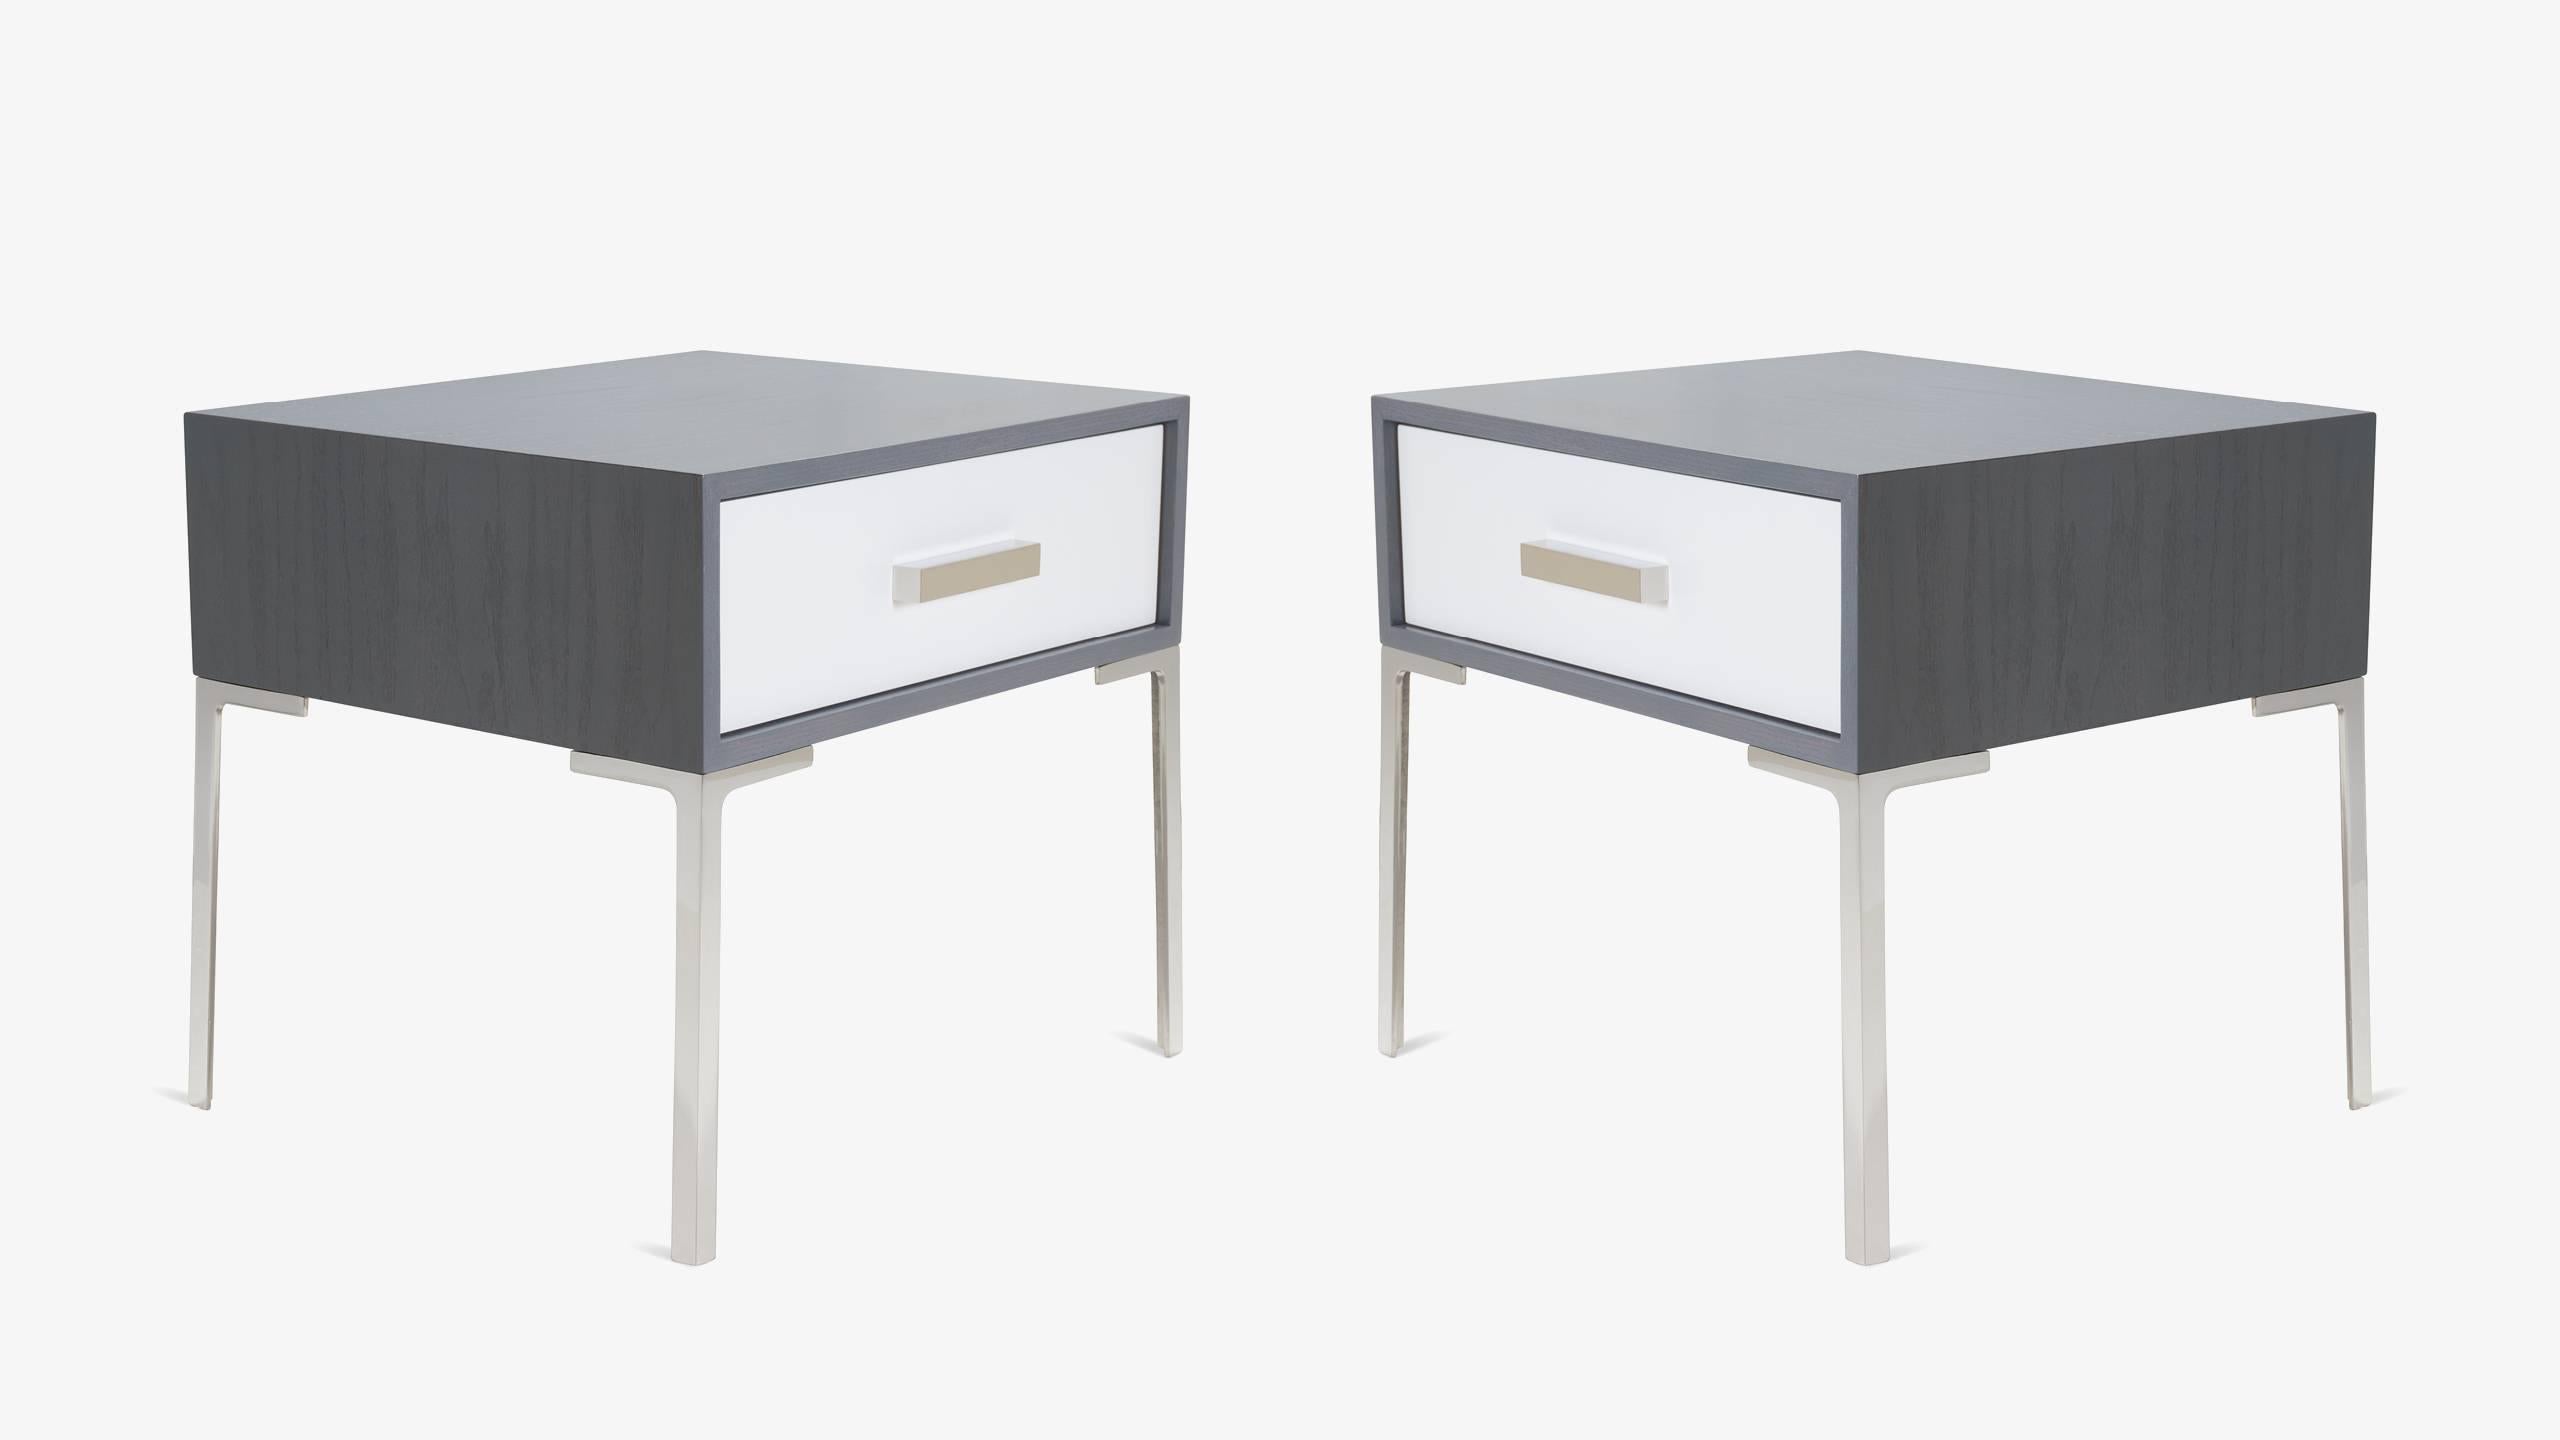 A stunning iteration of our Astor Nightstands by Montage featuring sleek nickel-plated hardware and introducing a new finish: Oak in Washed Gray. Astor is among many pieces in the Montage Studio Collection, designed with the Mid-Century in mind